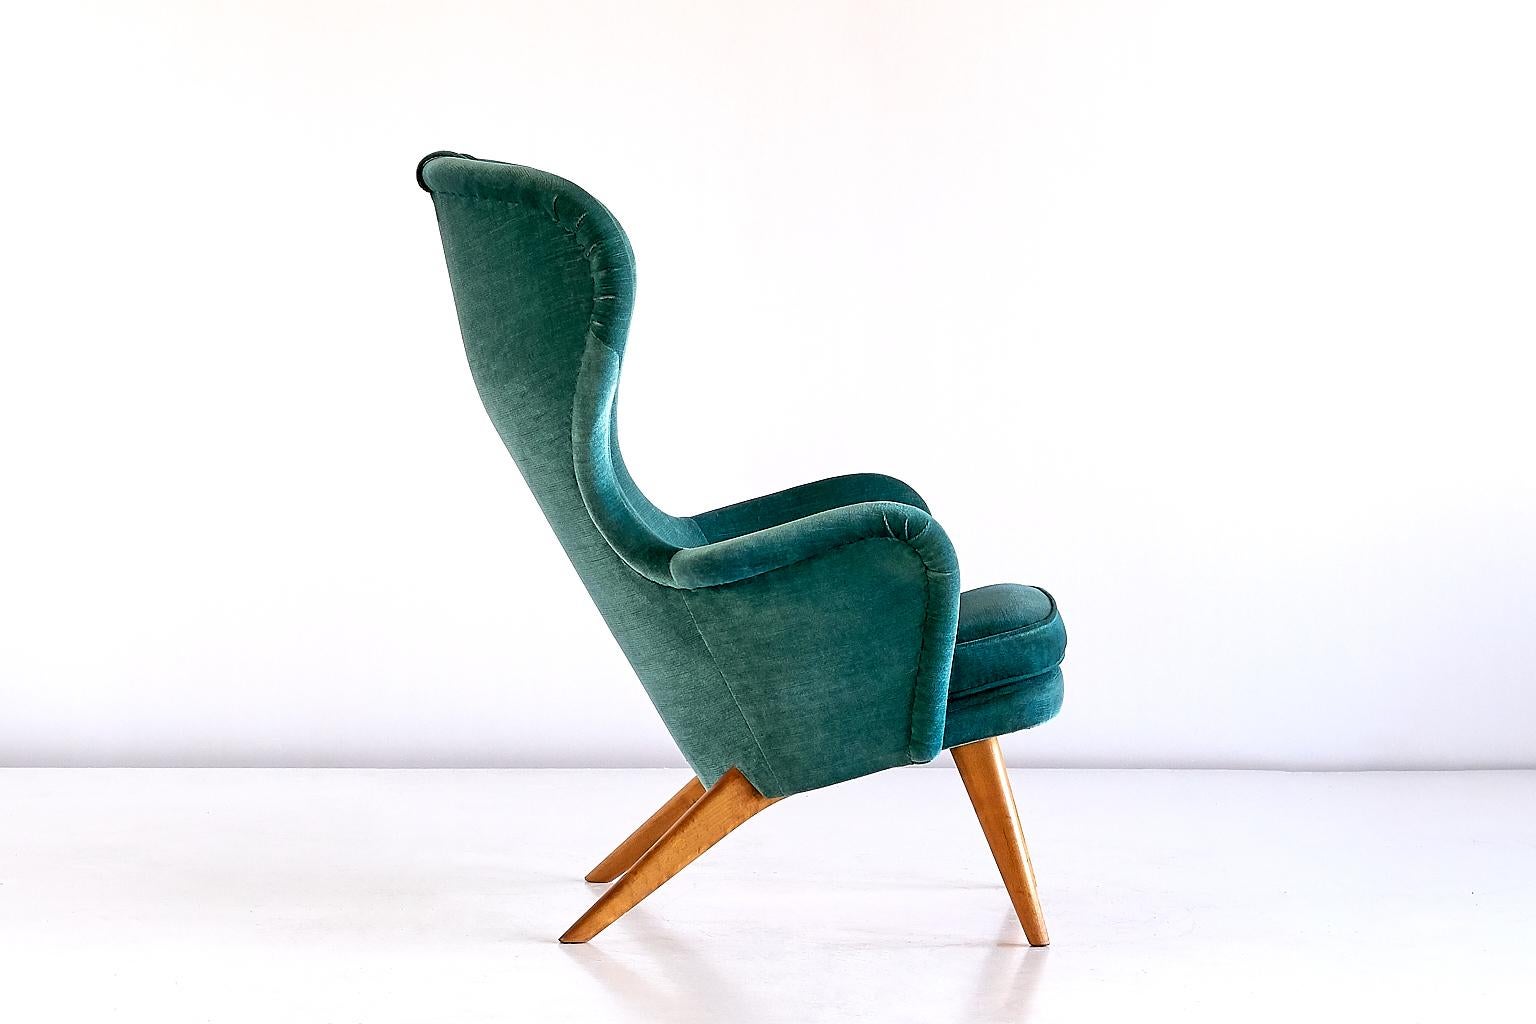 Lacquered Carl-Gustav Hiort Af Ornäs Wingback Armchair in Teal Velvet, Finland, 1952